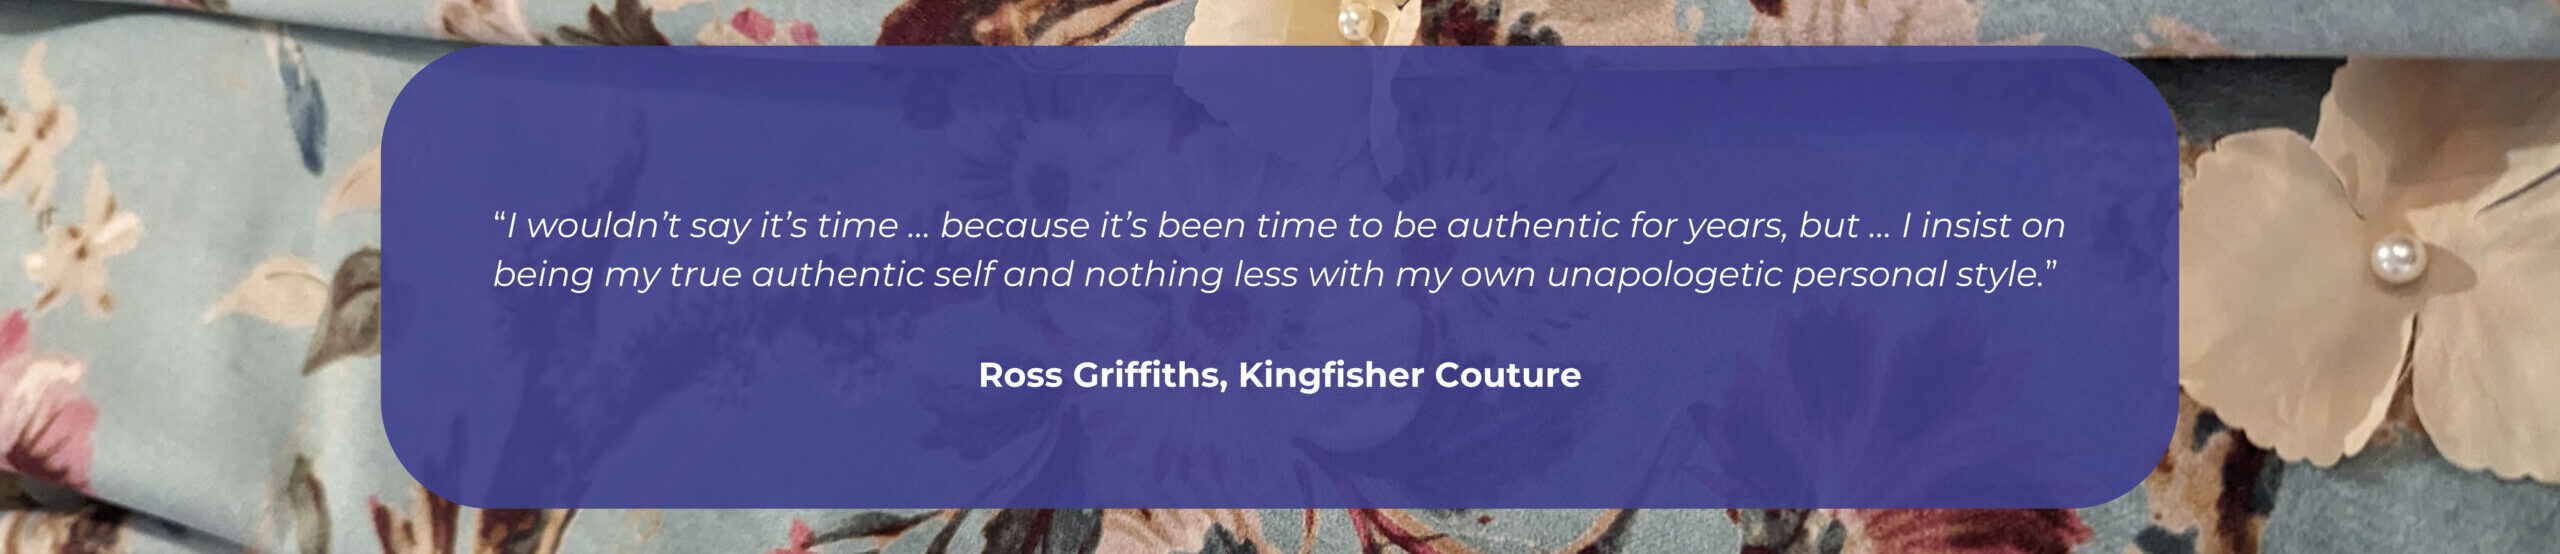 A quote from Ross Griffiths that reads: I wouldn’t say it’s time … because it’s been time to be authentic for years, but … I insist on being my true authentic self and nothing less with my own unapologetic personal style.